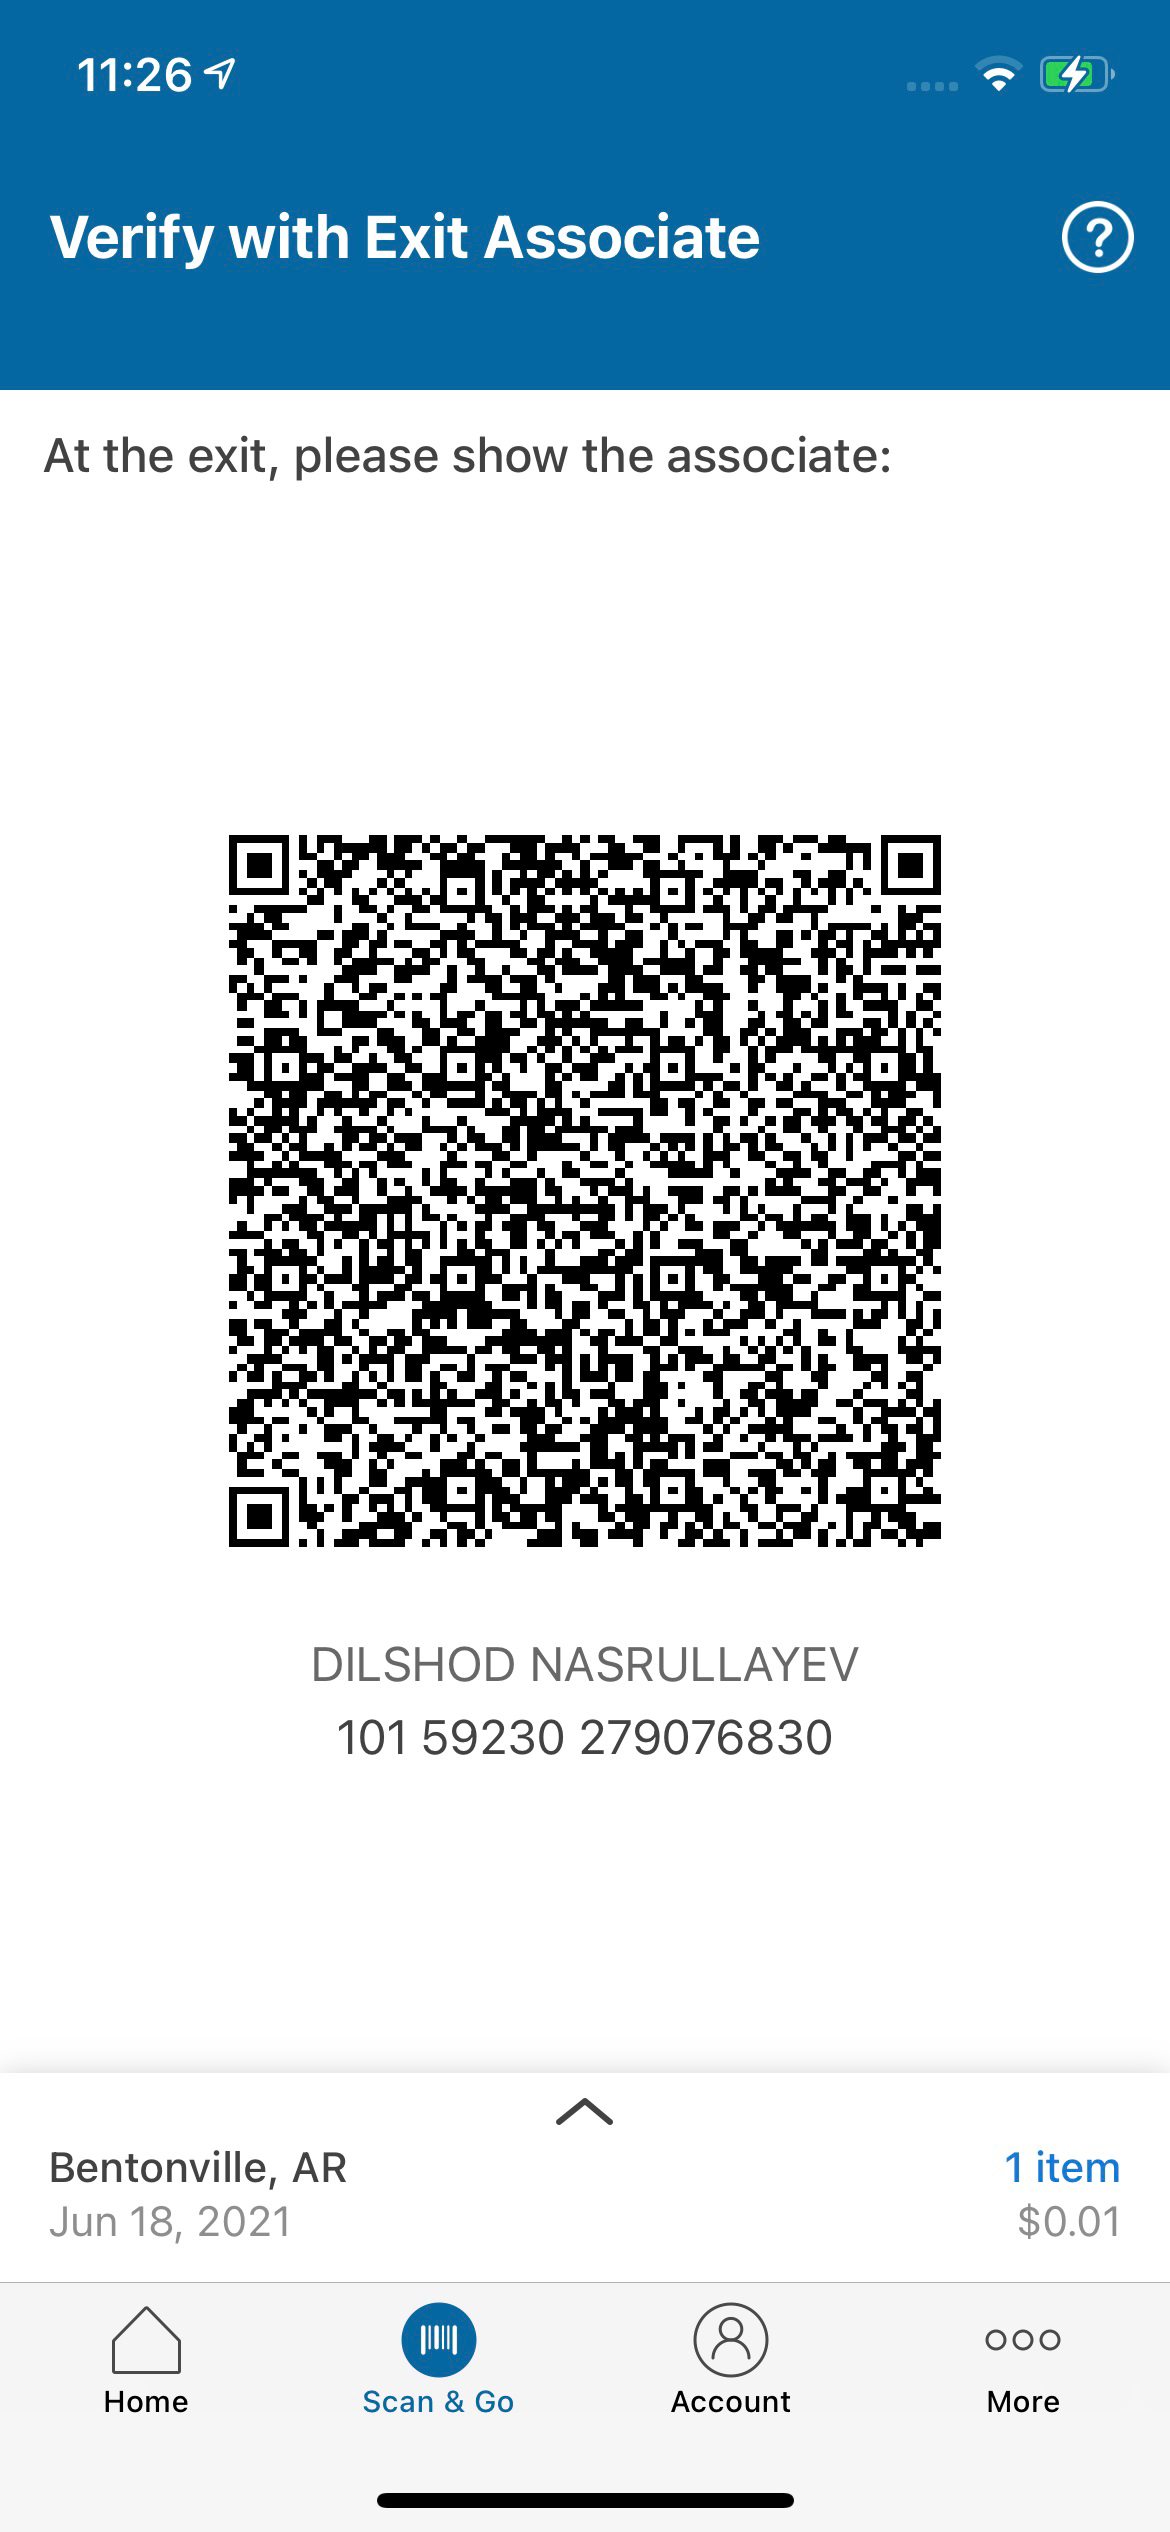 Help with Scan & Go